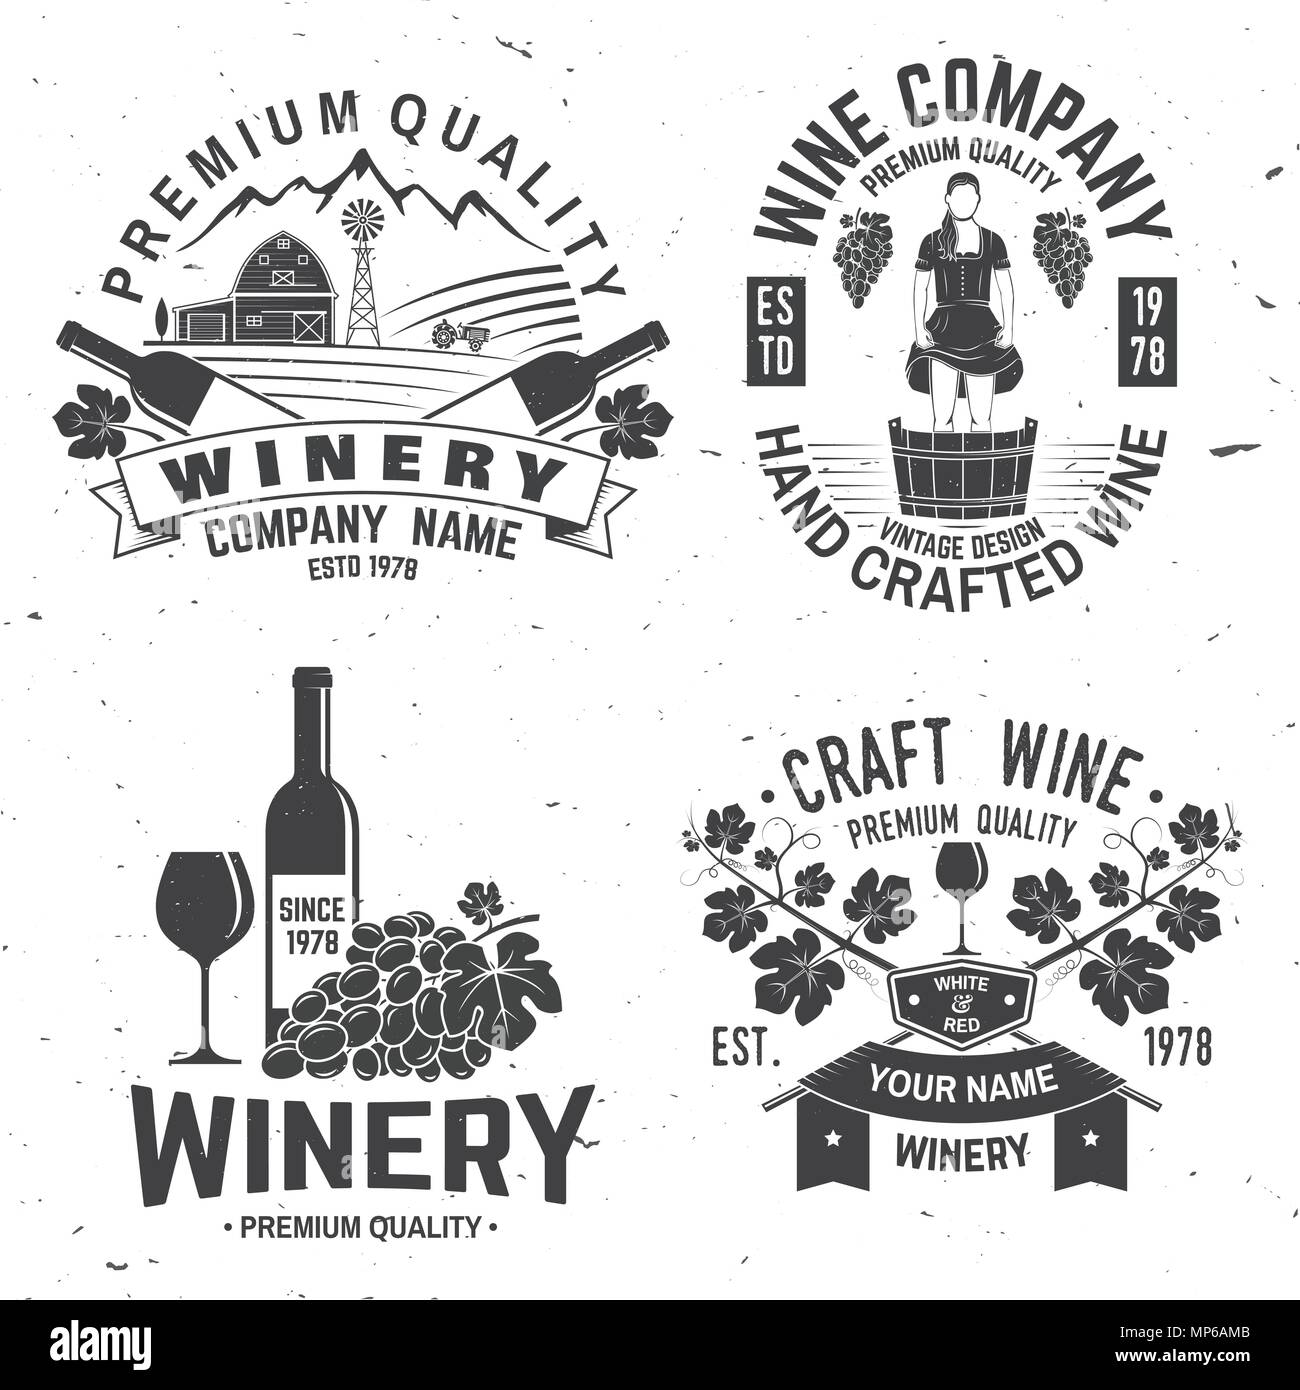 Set of wine company badge, sign or label. Vector illustration. Vintage design for winery company, bar, pub, shop, branding and restaurant business. Coaster for wine glasses Stock Vector